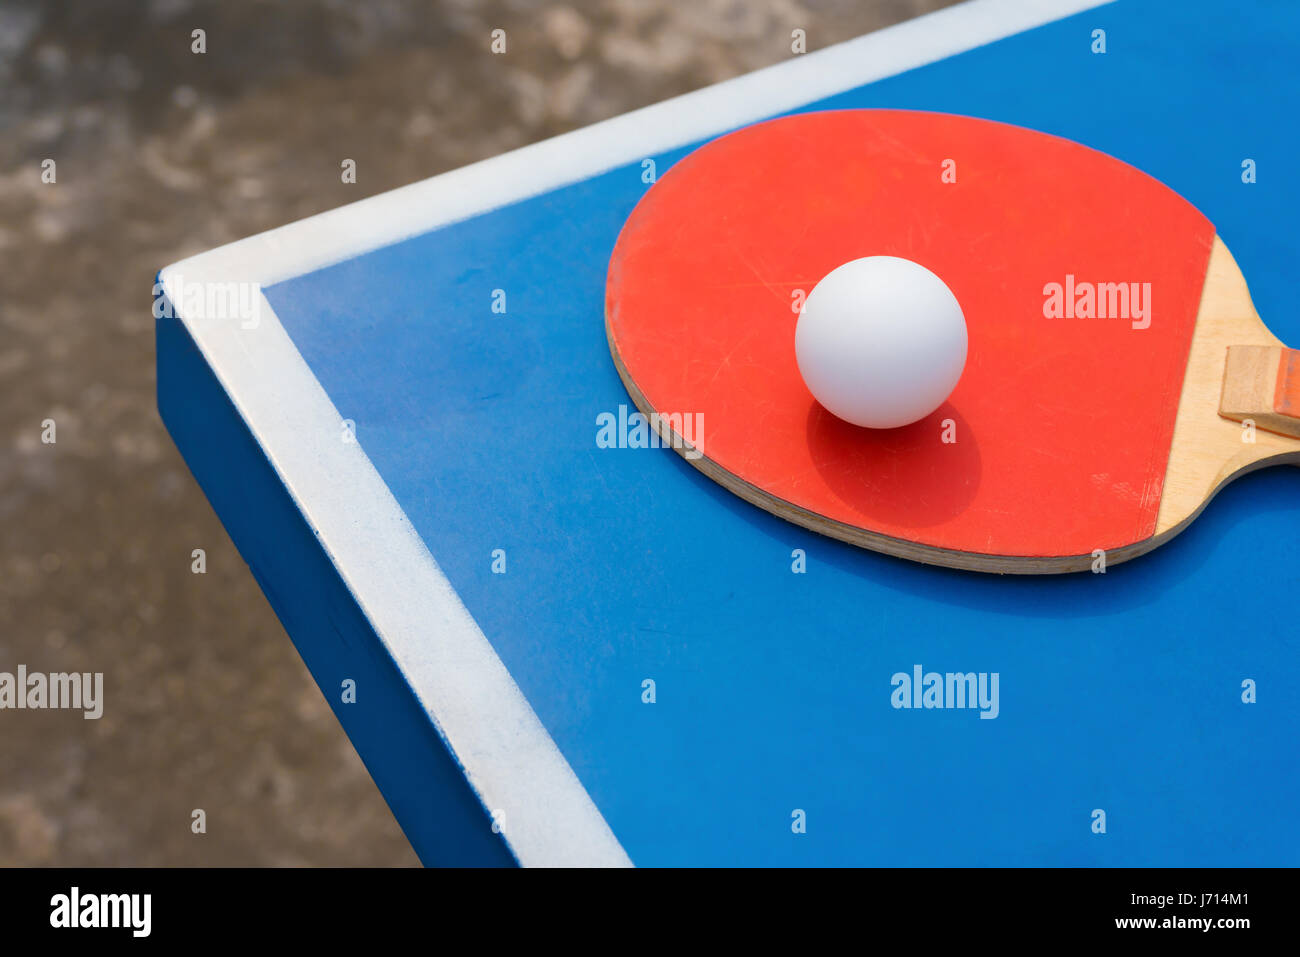 pingpong rackets and ball on a blue table Stock Photo